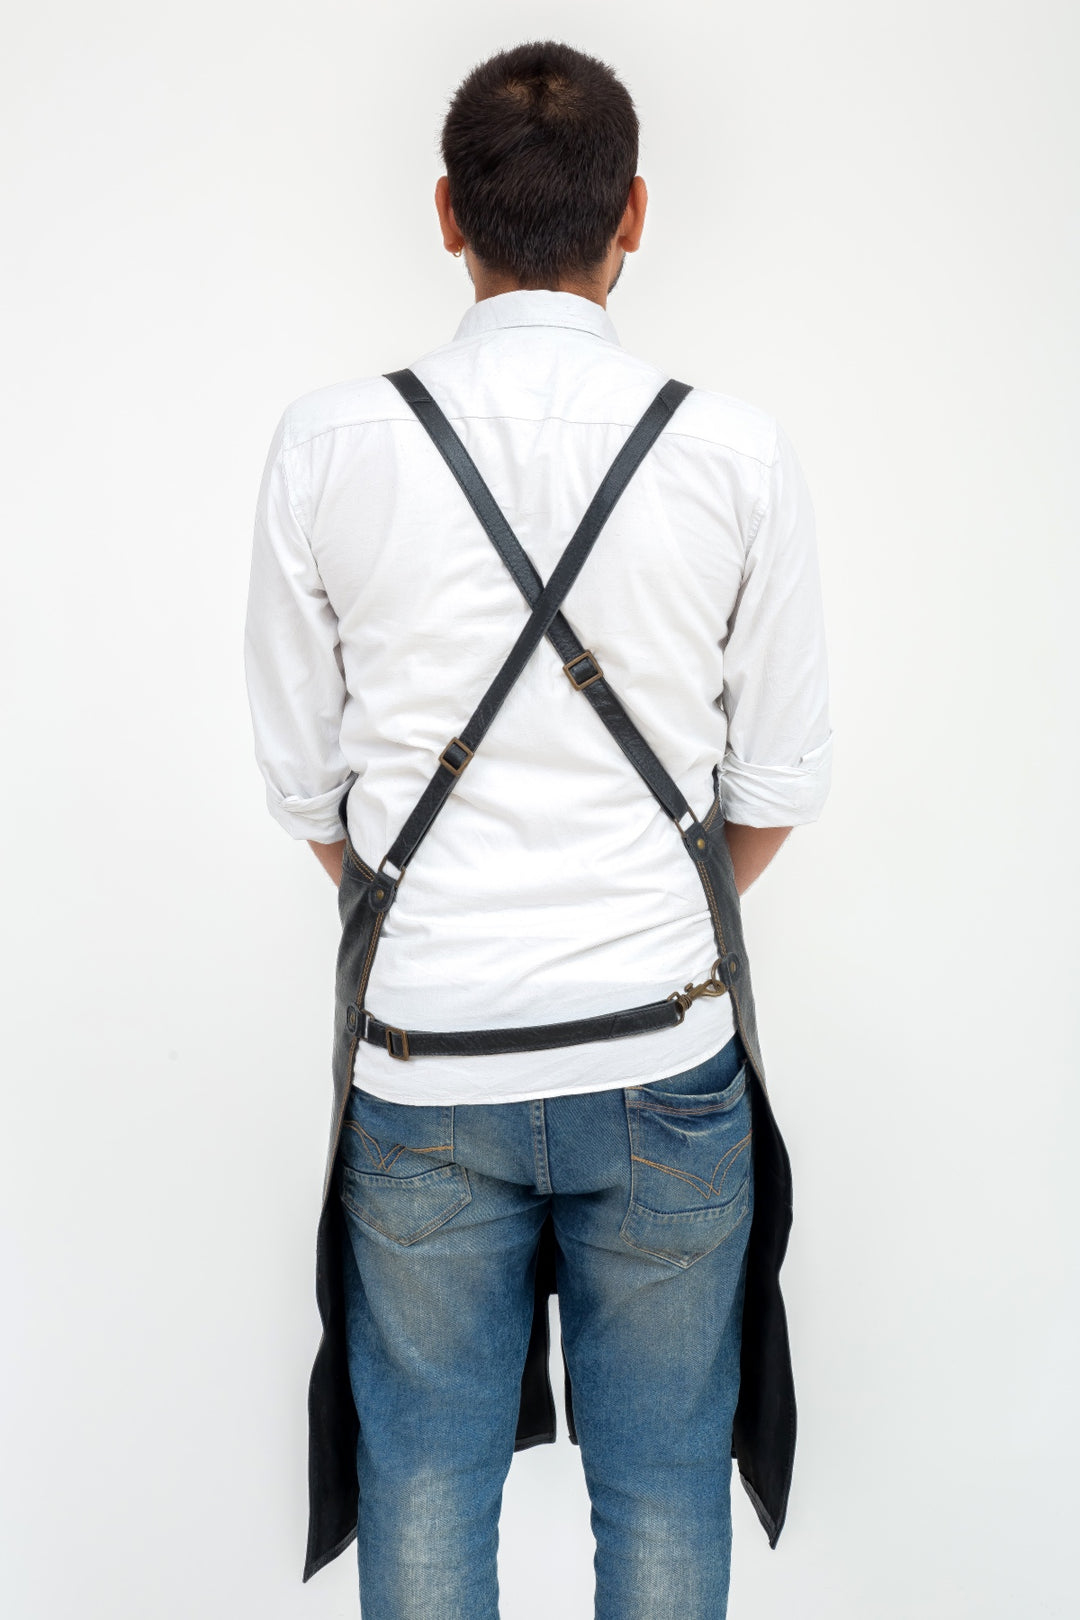 Indepal - Oliver Leather Apron in Black Leather | Buster McGee Daylesford